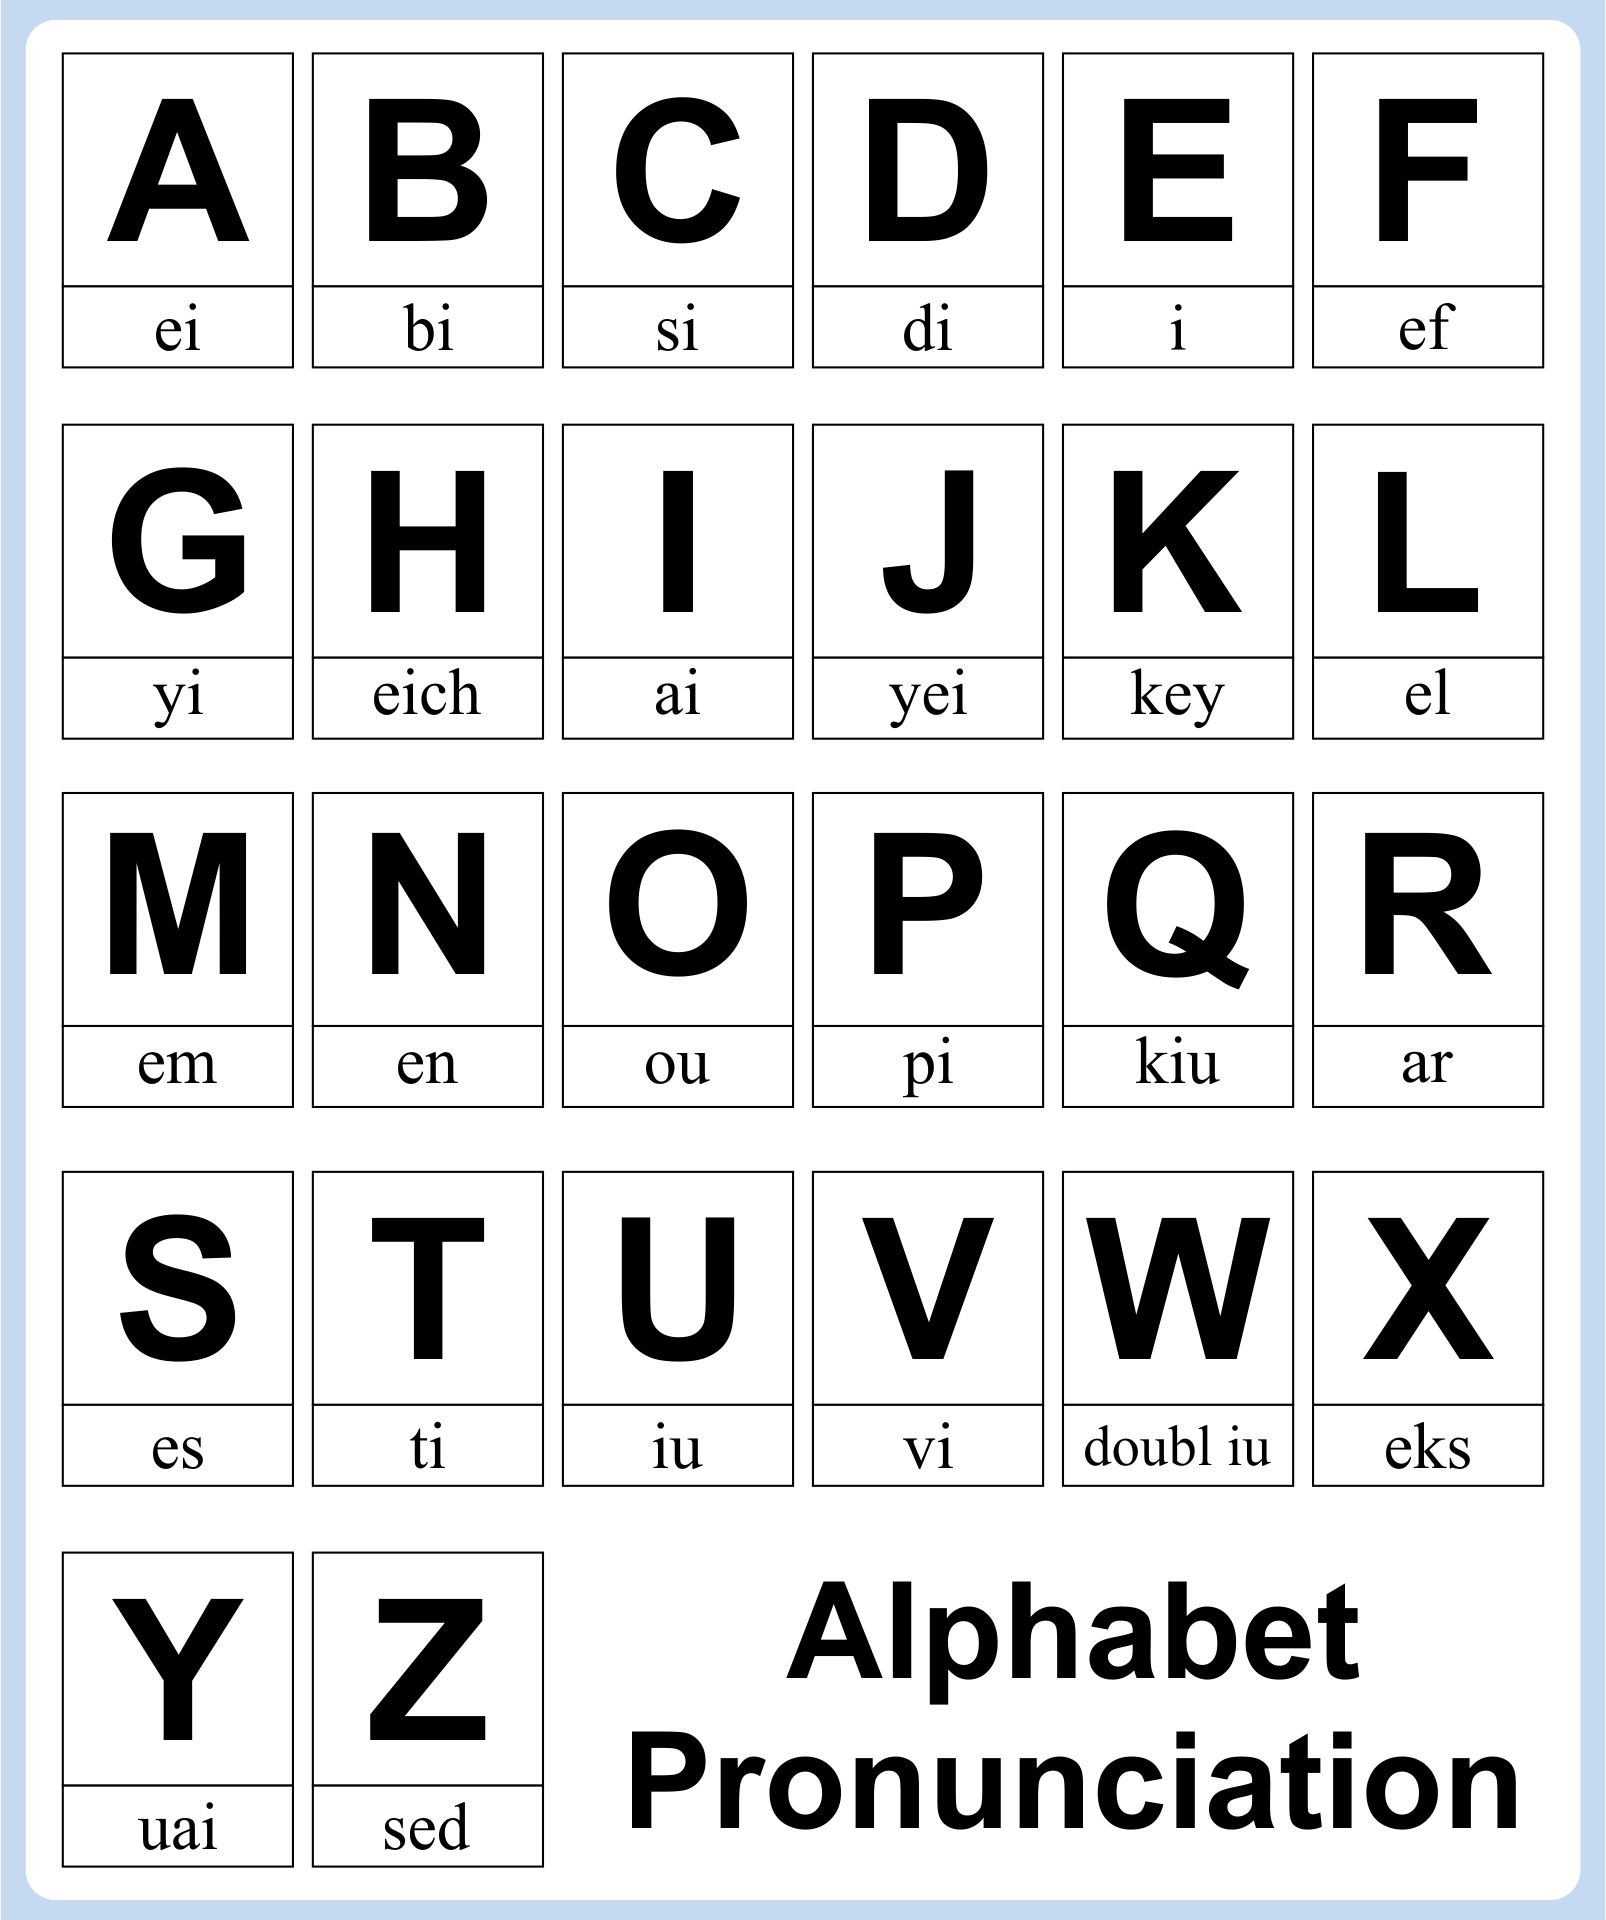 spelling alphabet letters in english